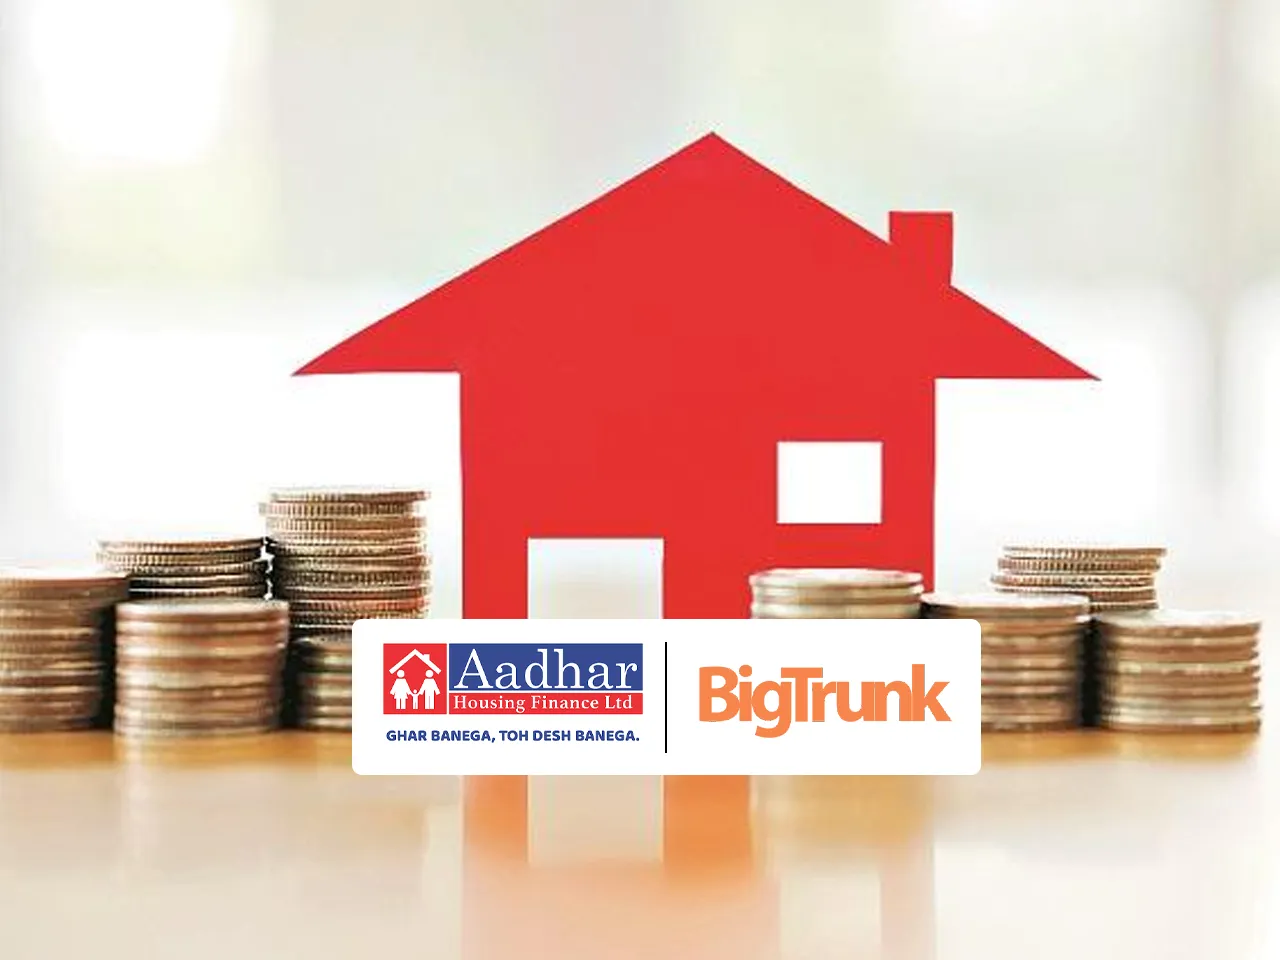 BigTrunk Communications extends its digital media partnership with Aadhar Housing Finance